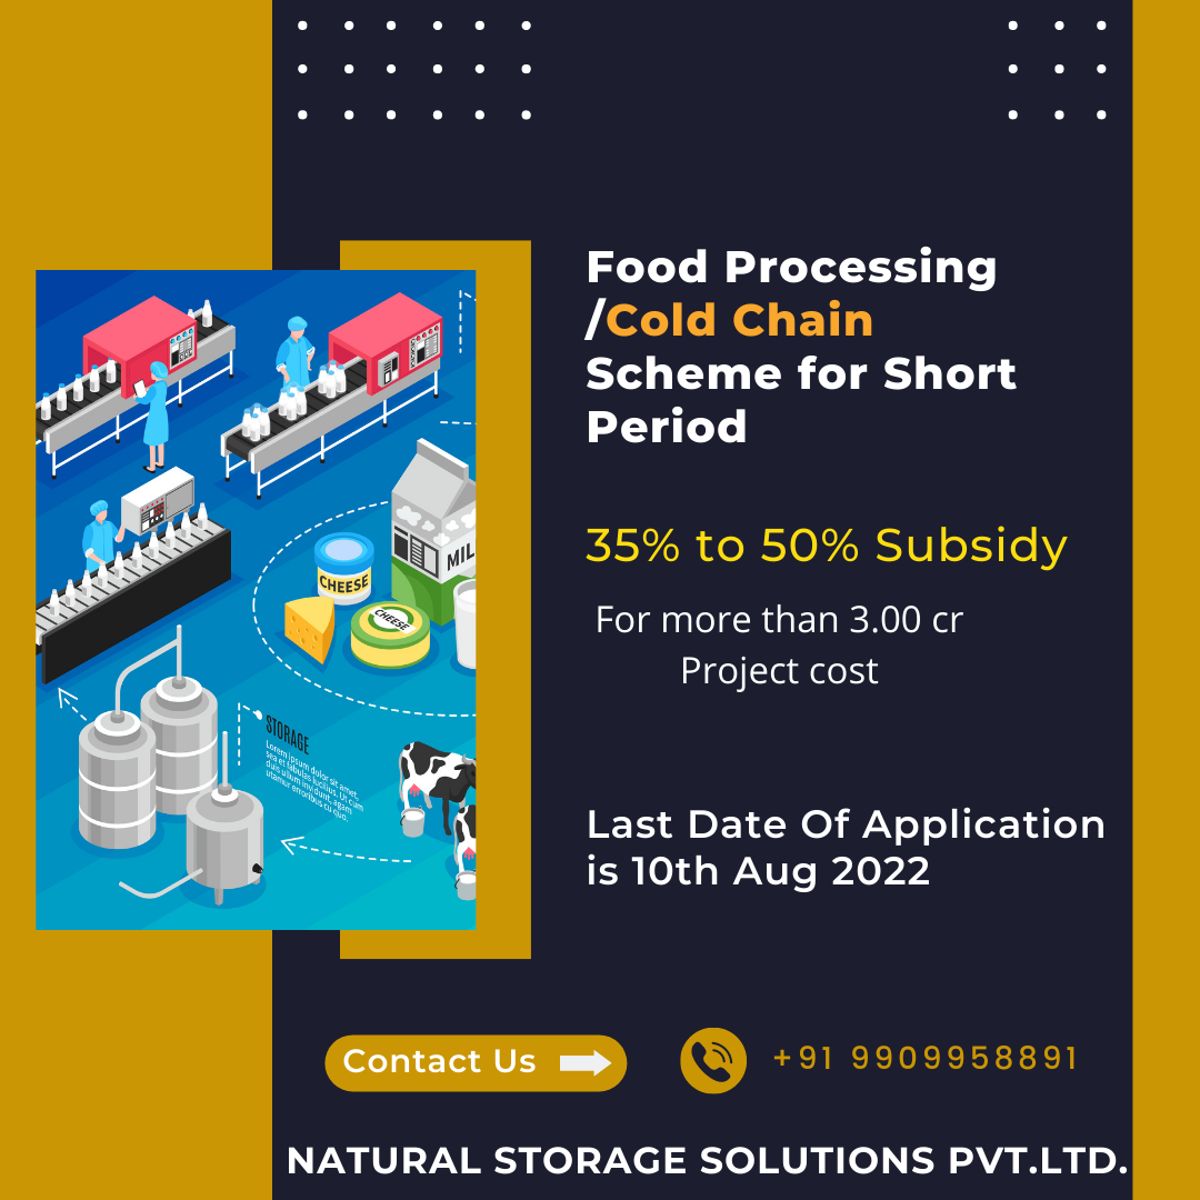 Investment support of Indian government: Food Processing Cold Chain Scheme for Short Period